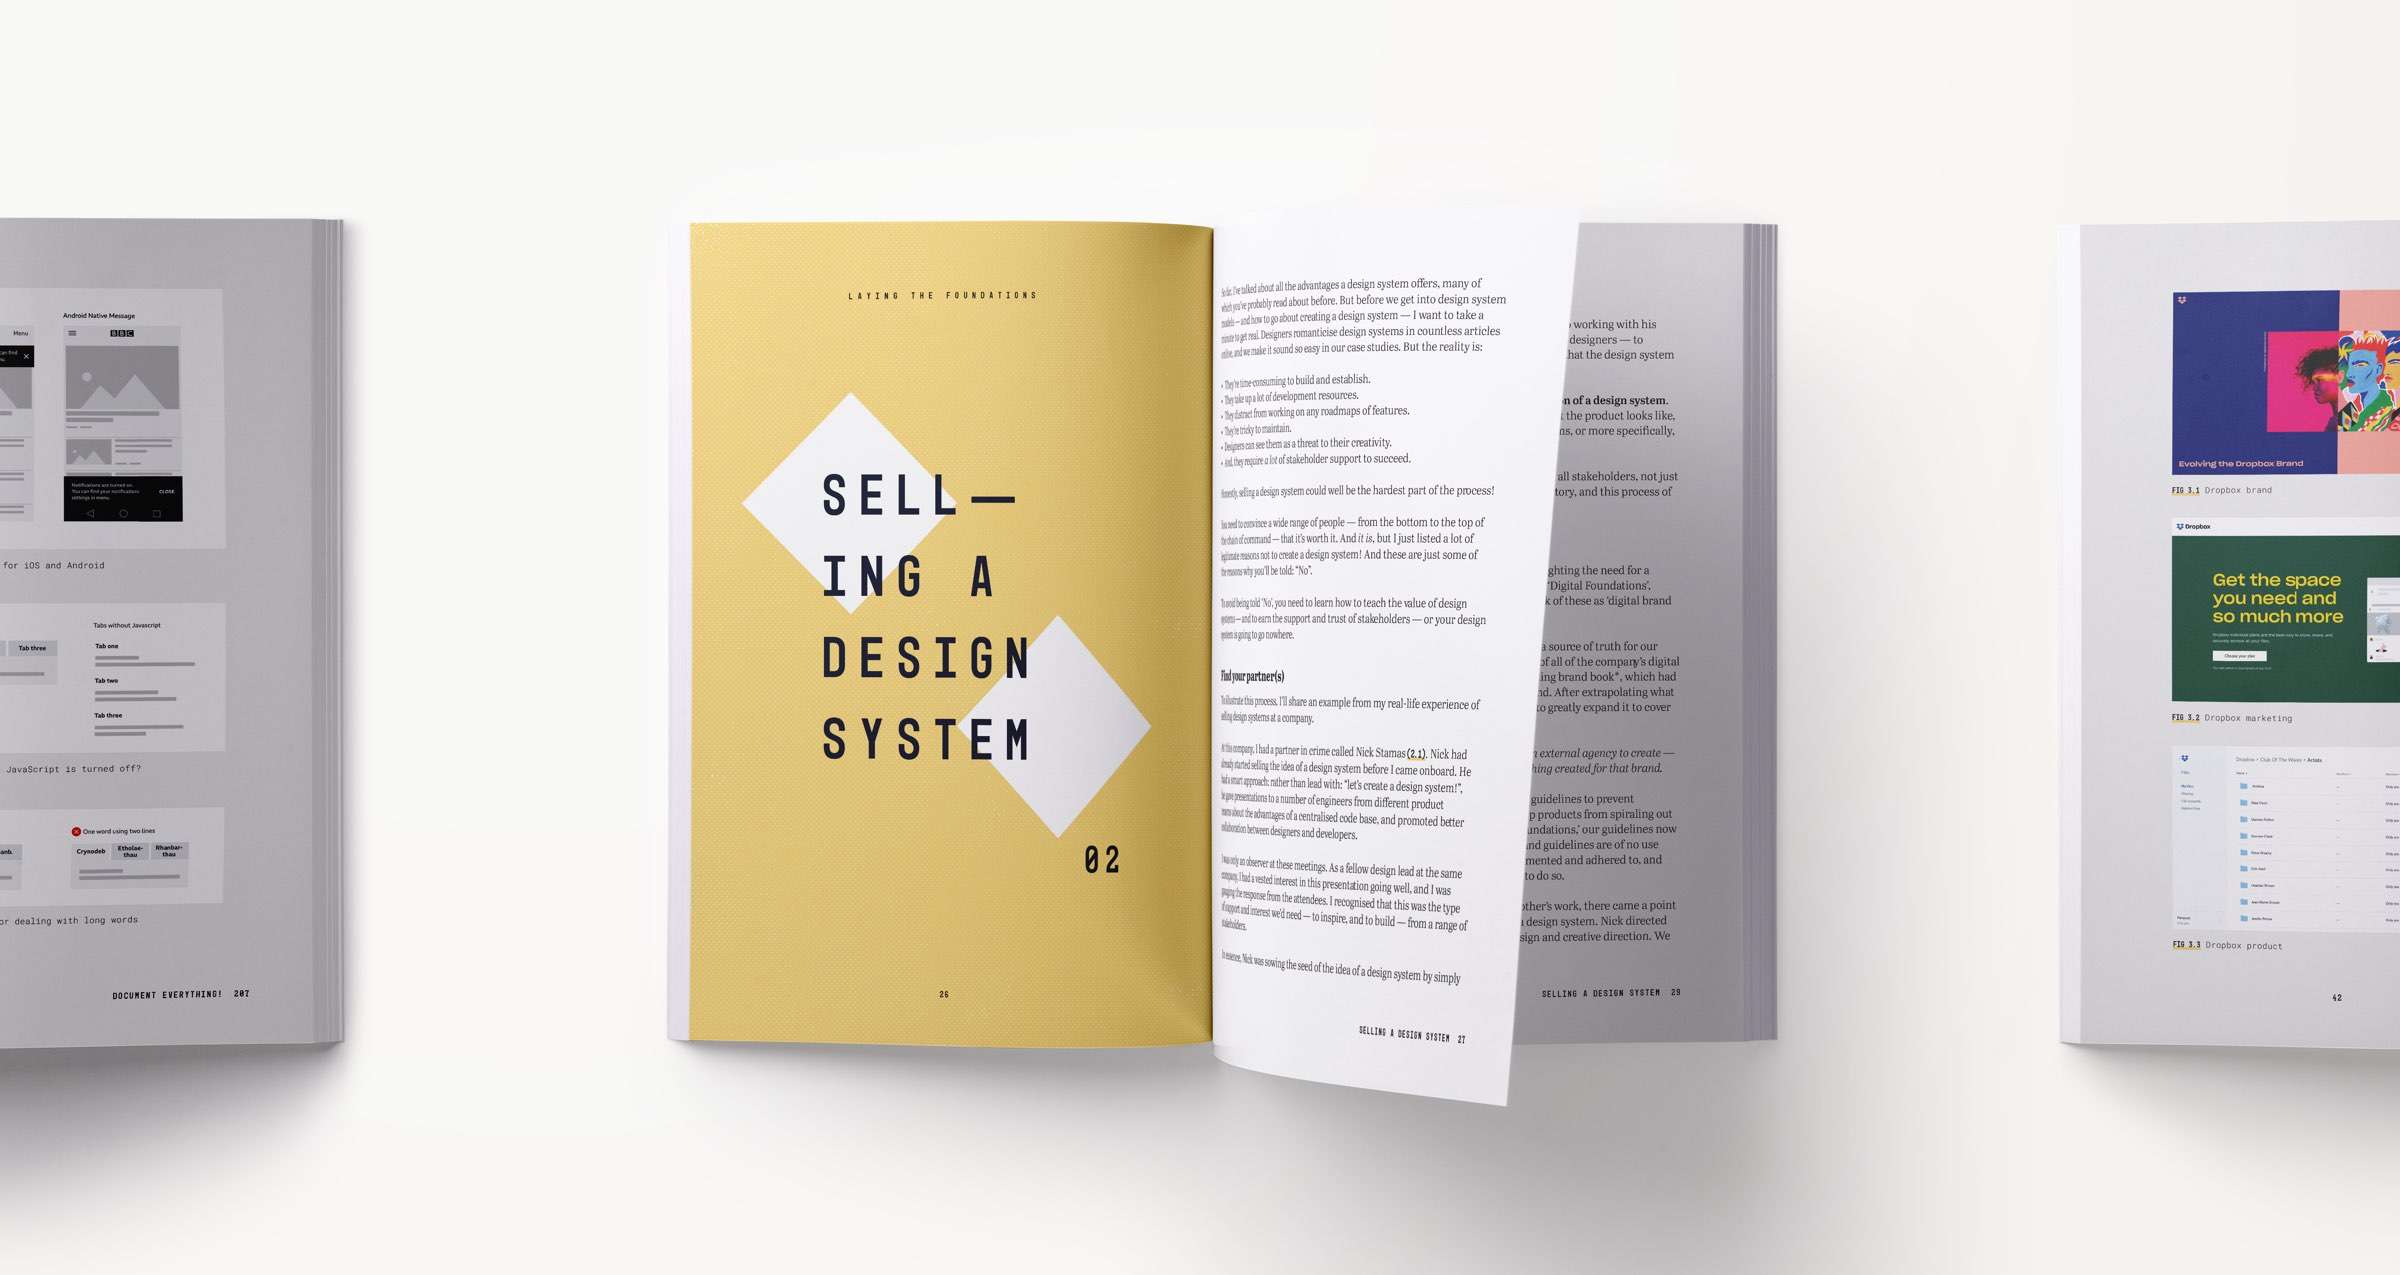 A design systems book spread showing content related to selling a design system at your company and within your design team and organisation